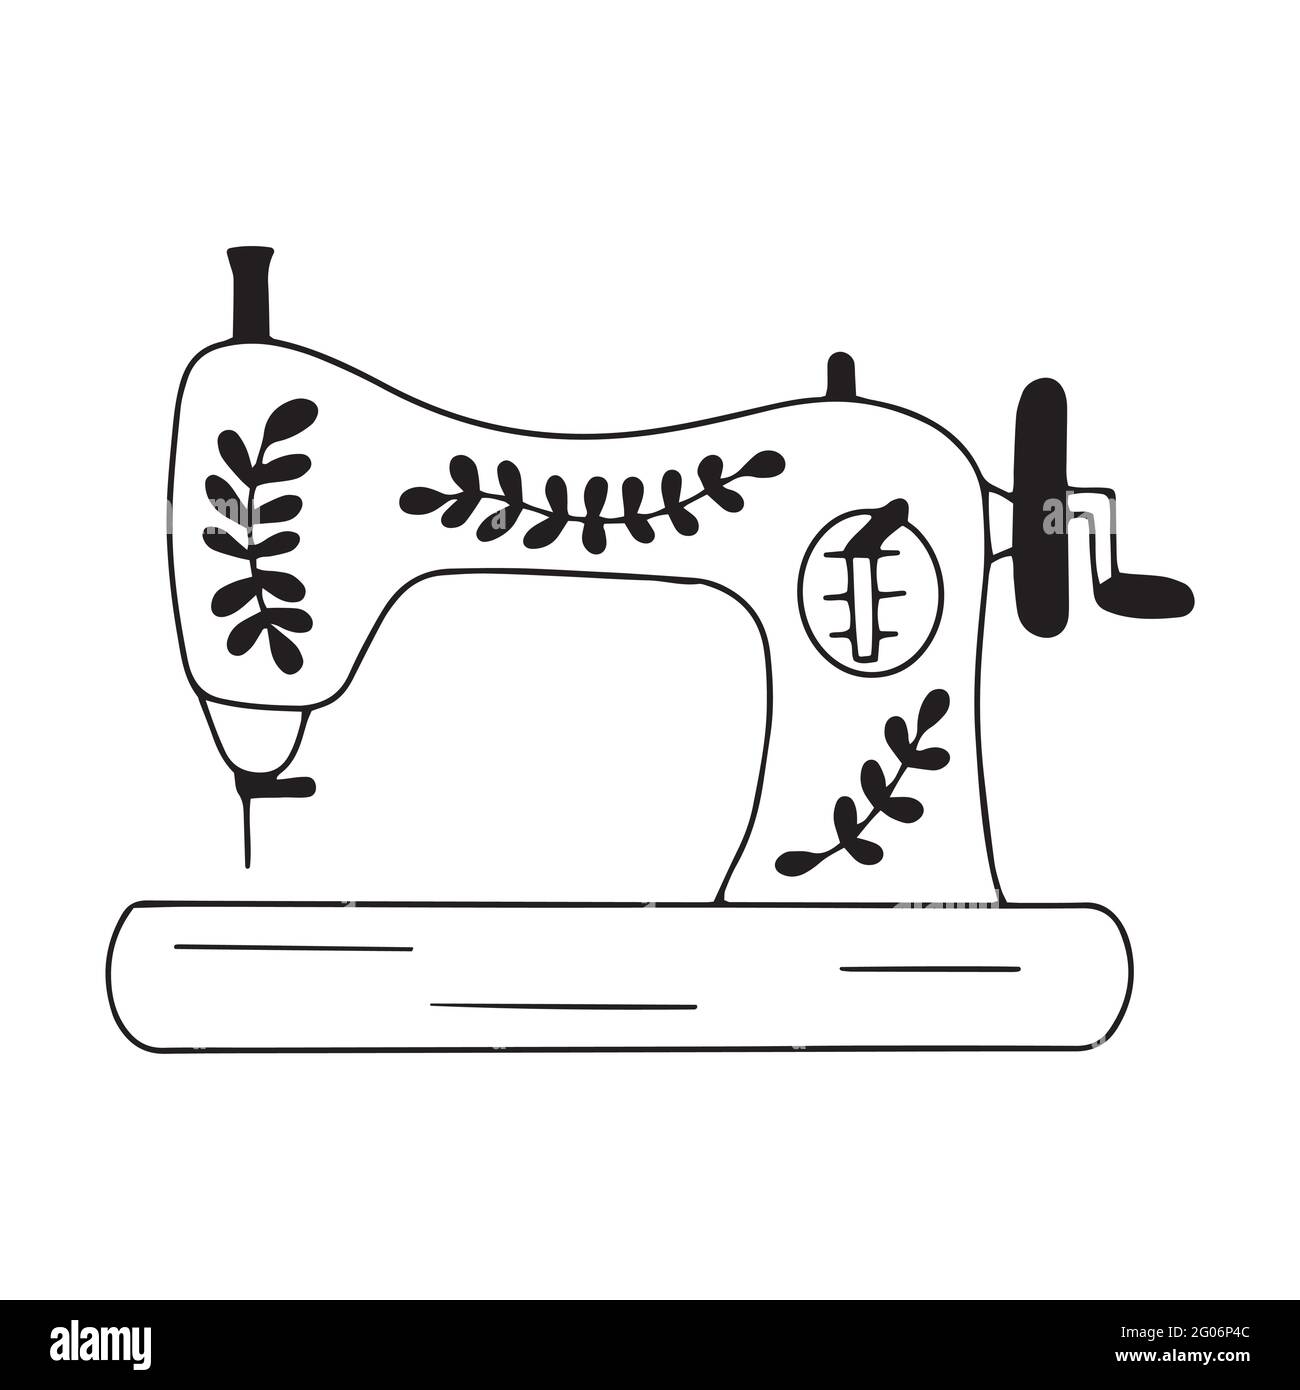 Sewing machine sketch style Royalty Free Vector Image